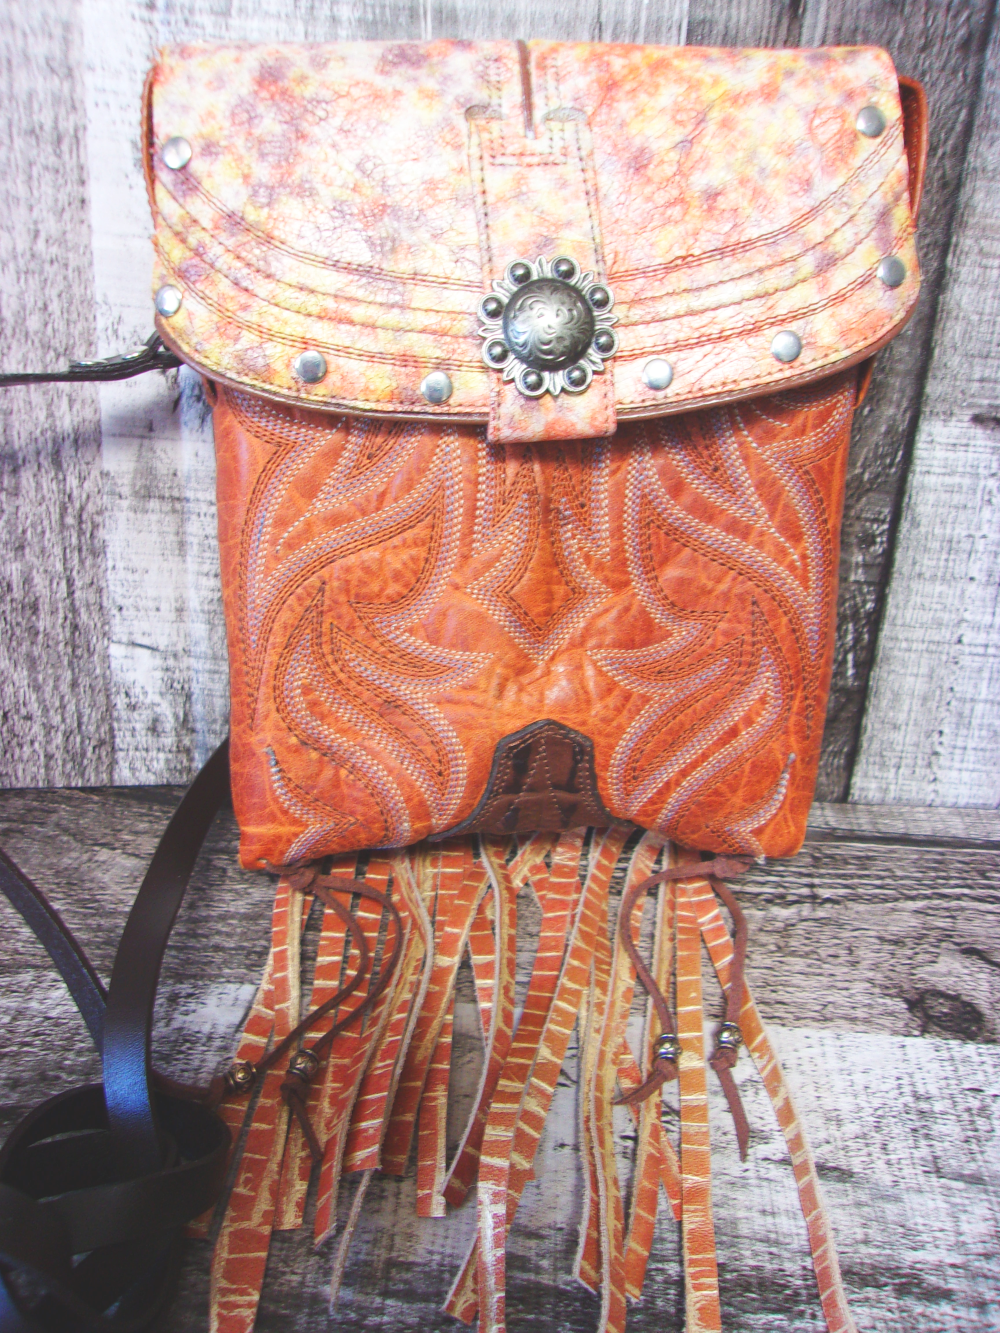 Small Cowboy Boot Purse with Fringe sm237 handcrafted from cowboy boots. Shop all unique leather western handbags, purses and totes at Chris Thompson Bags